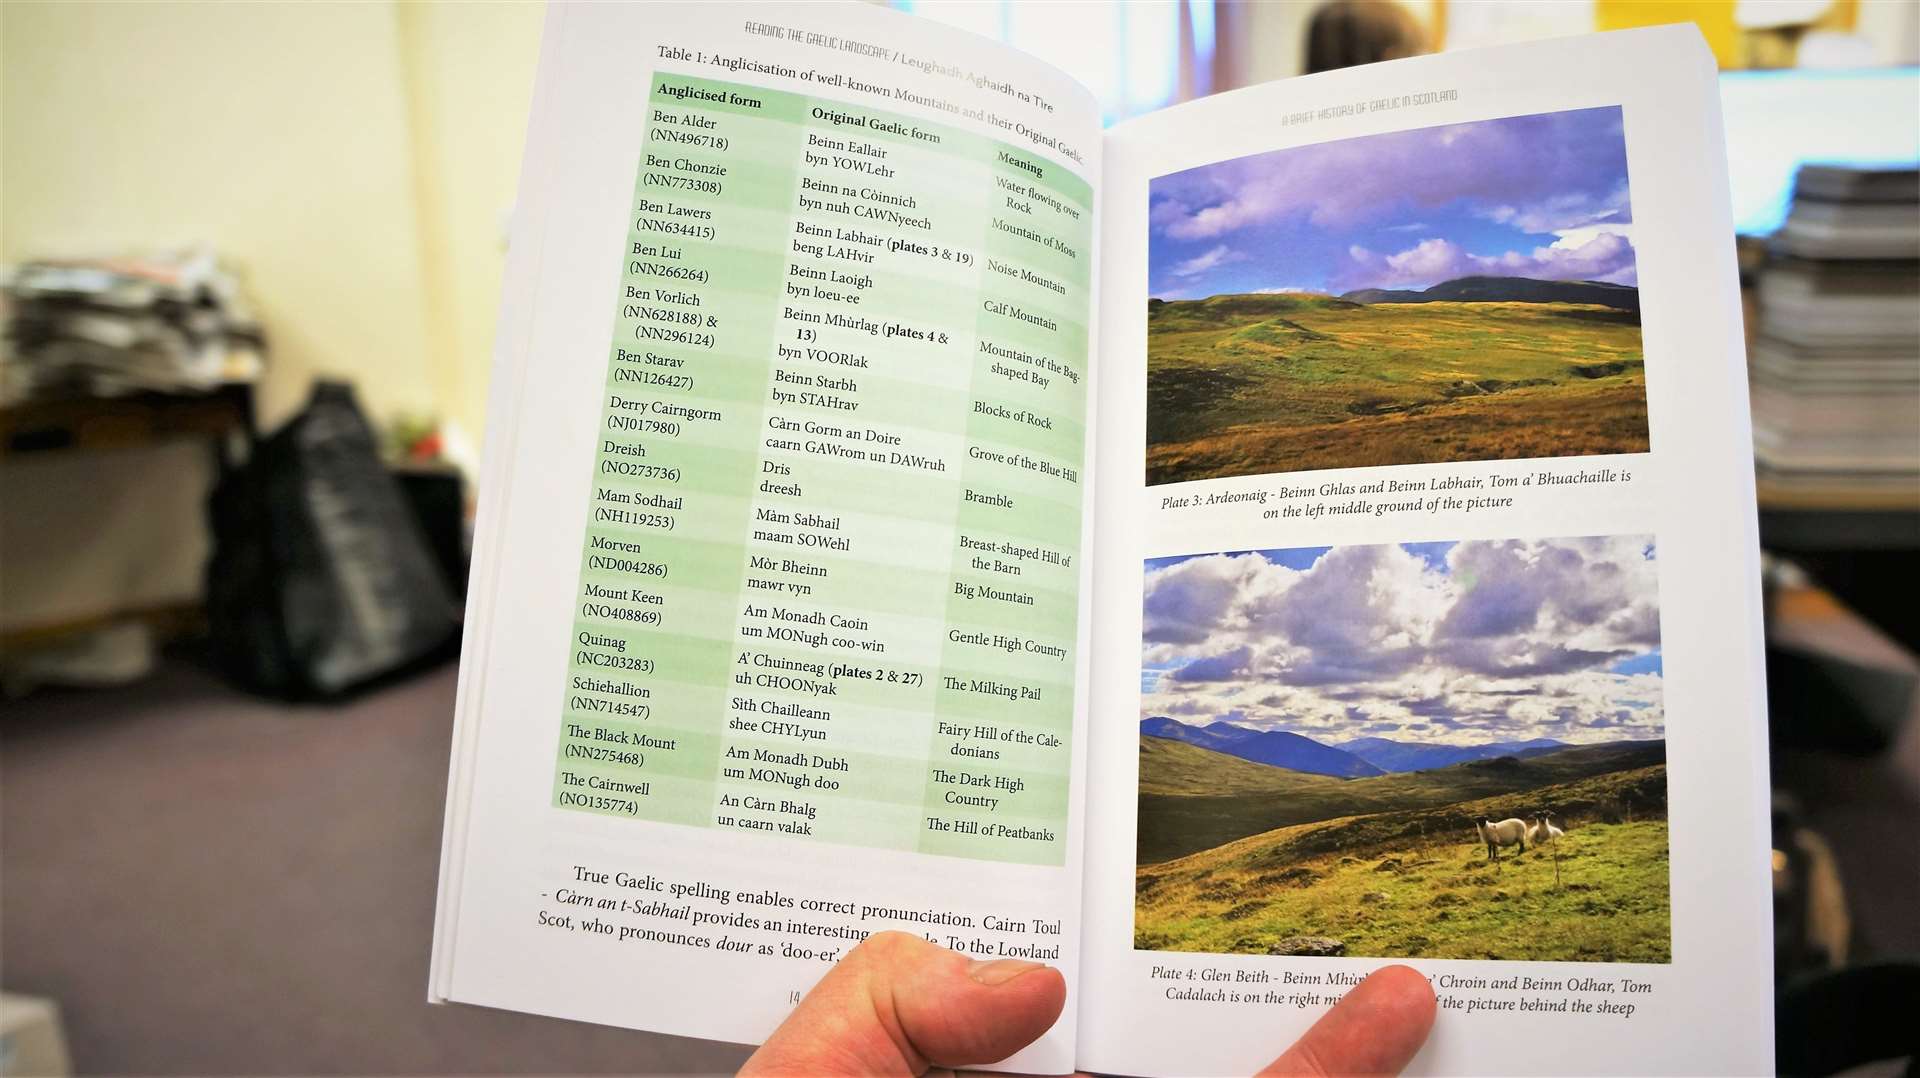 The book contains many images and tables to help explain the Gaelic names encountered in the Highland countryside.